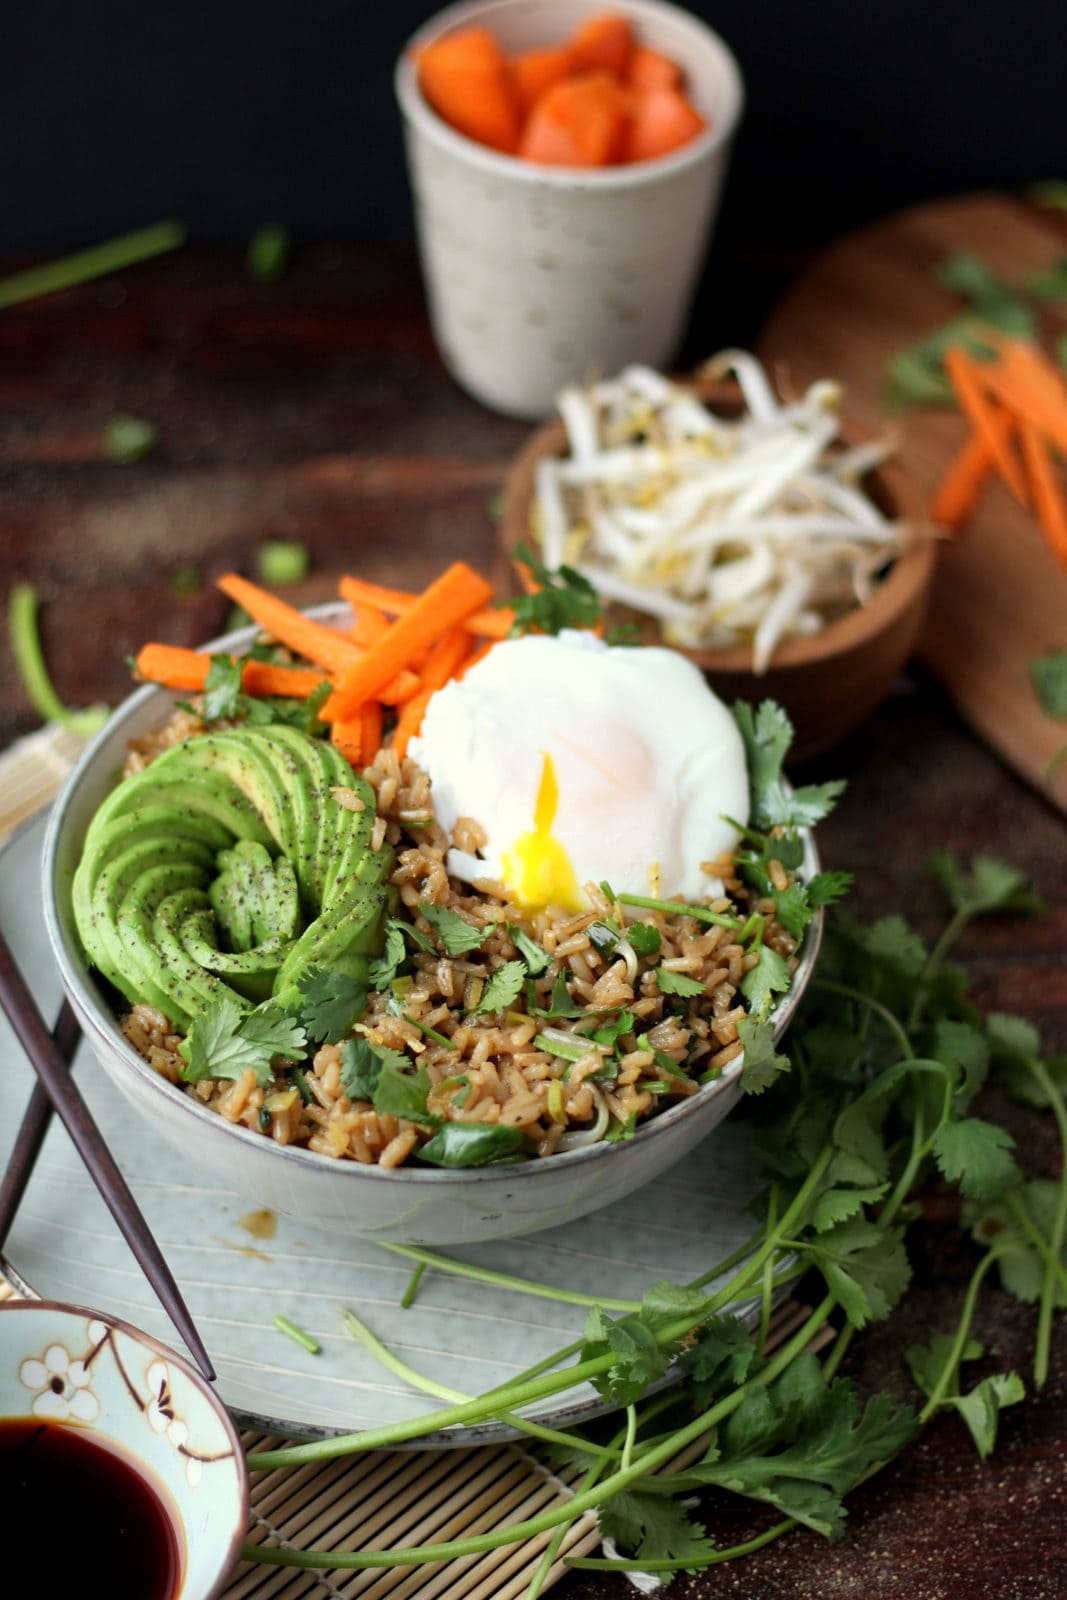 Cilantro Fried Rice + Avocado and Poached Egg - awesome vegetarian rice bowl recipe! thewoodenskillet.com #recipe #foodphotography